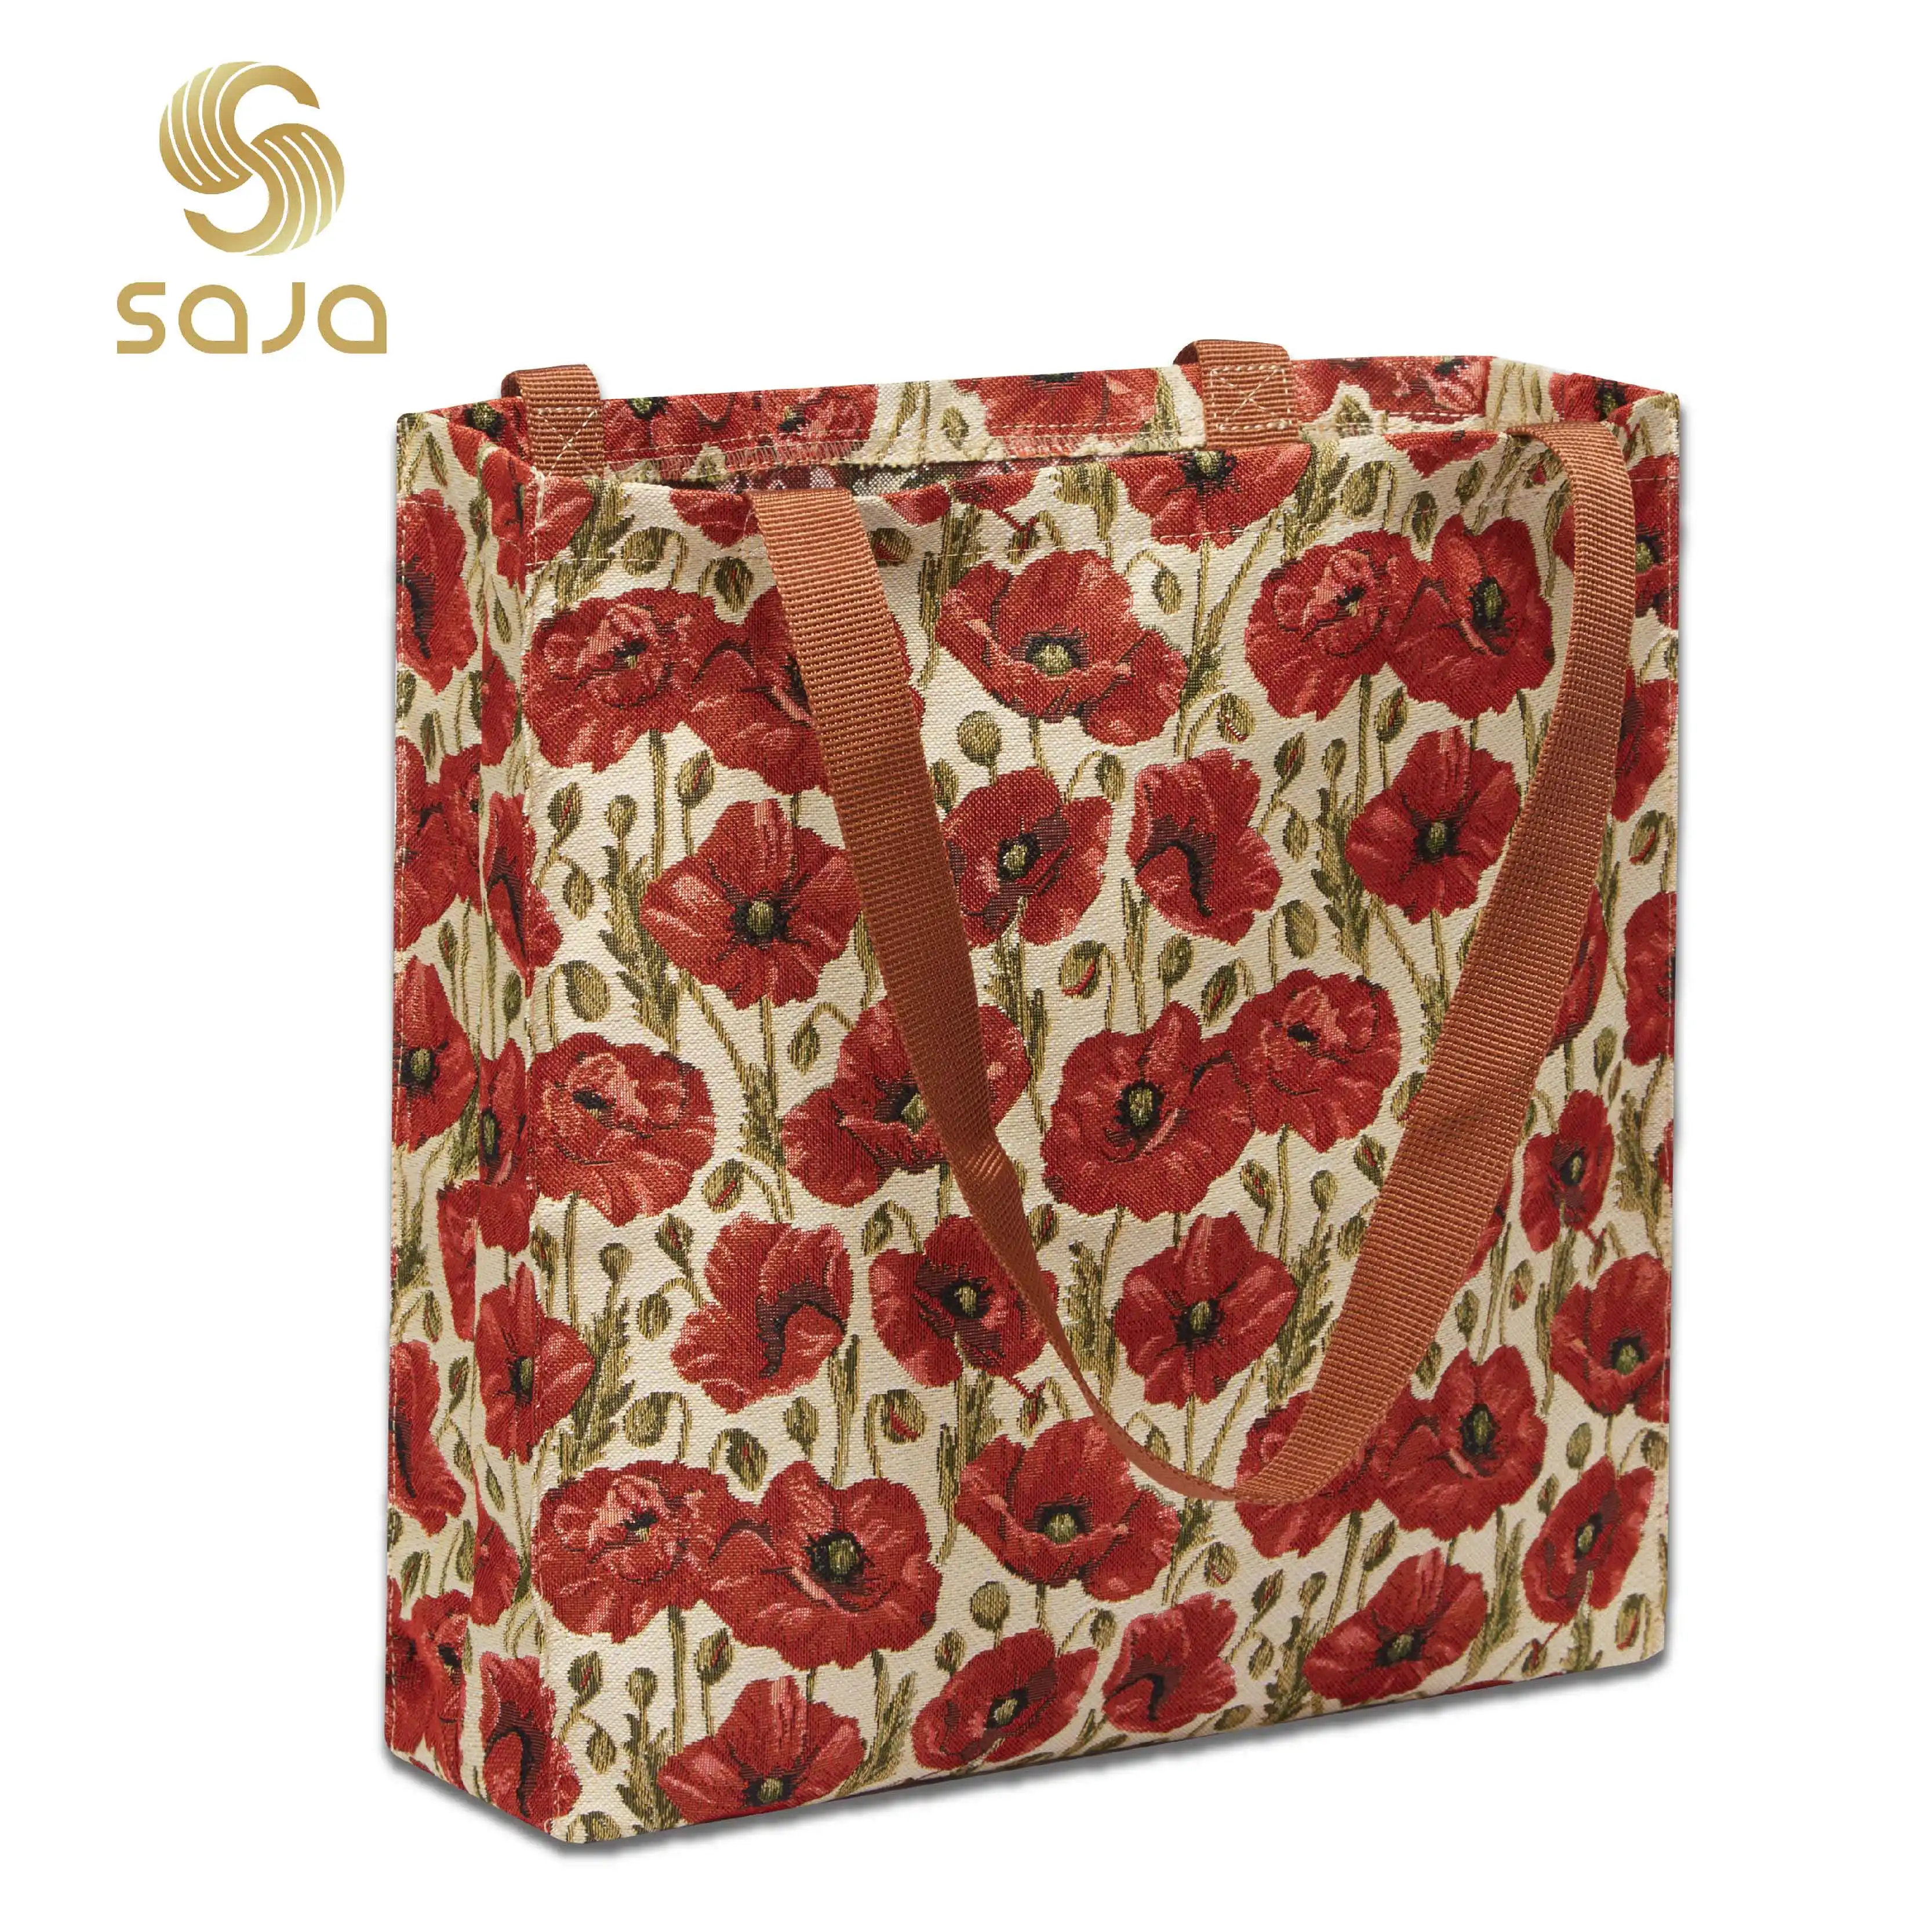 SAJA Foldable Shopping Bag Large Capacity Tote Bag Woman's Shoulder Bags Poppy Flower Female Gril Beach Grocery Bag for Travel flower sereise to do list refrigerator memo magnetic note pad fridge memo pad grocery shopping list pad magnetic notepads